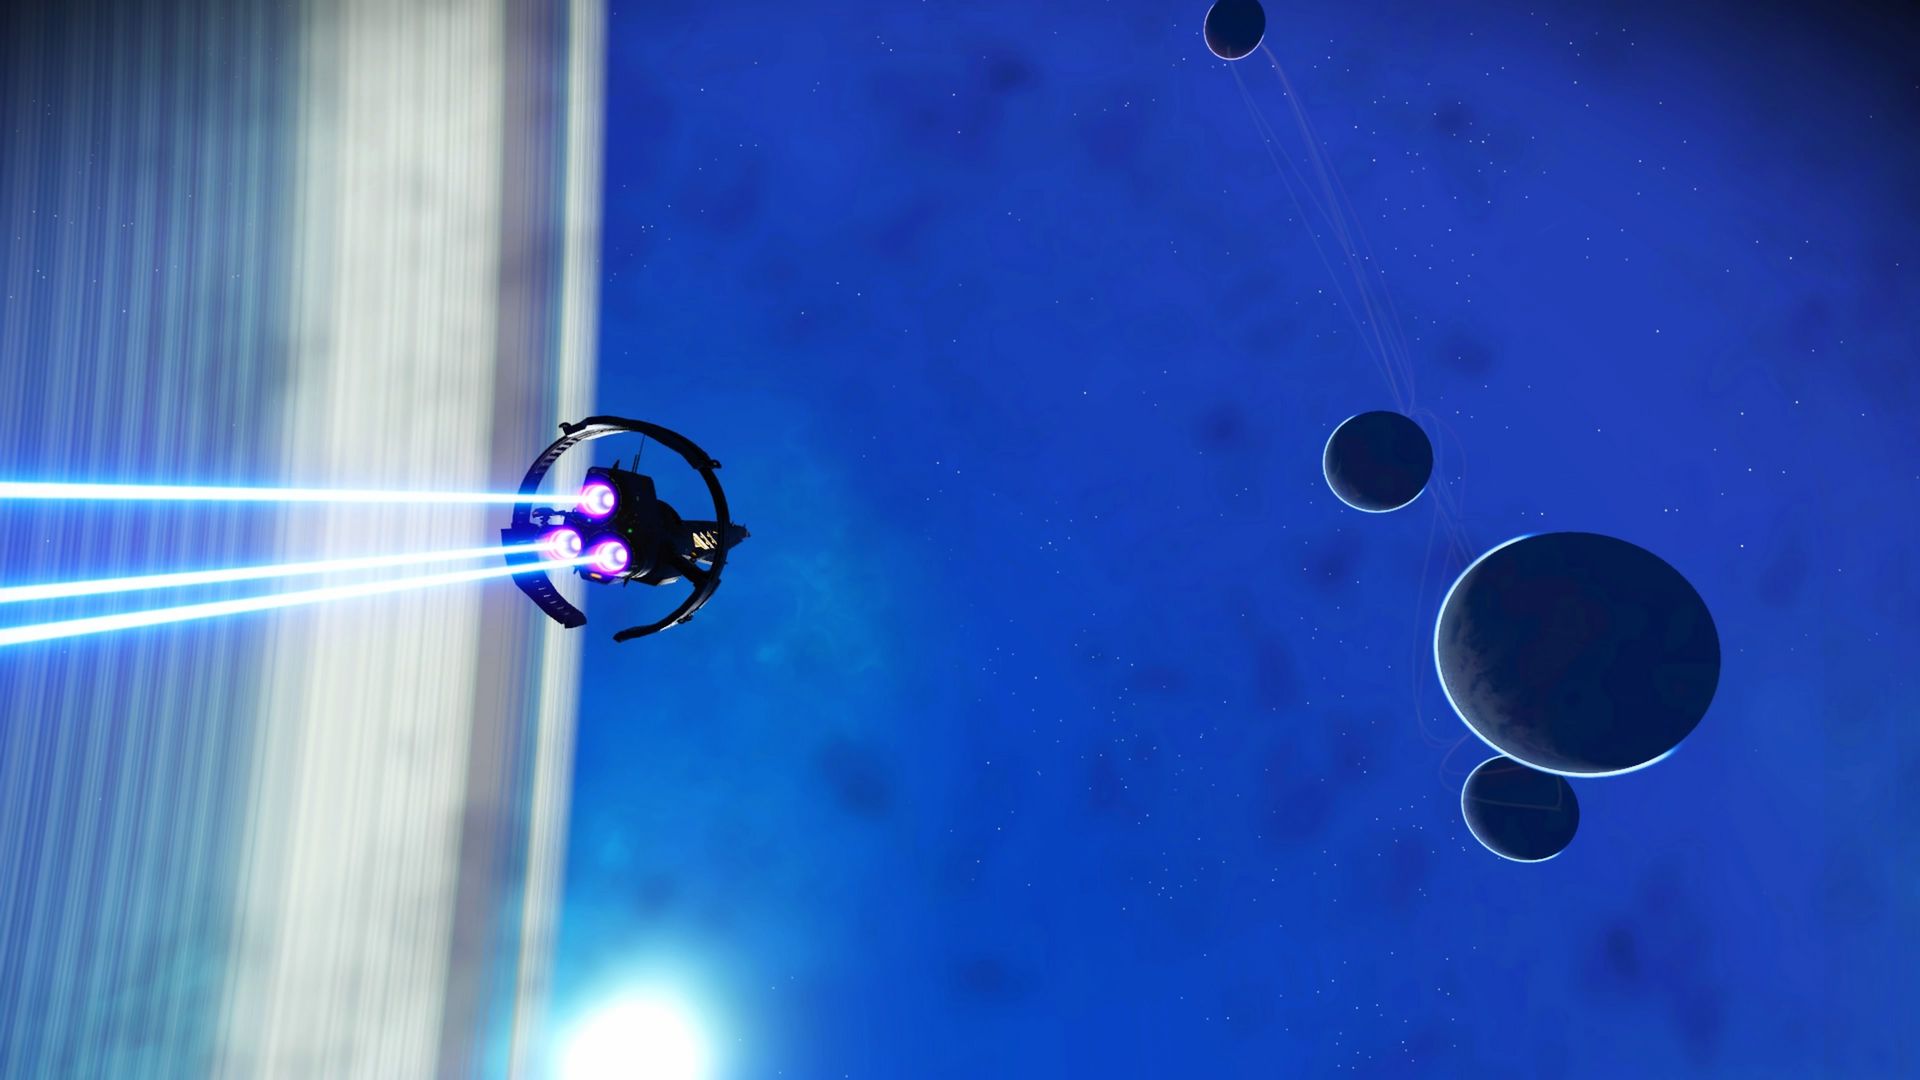 Amazing photos of space as captured in No Mans Sky image 14